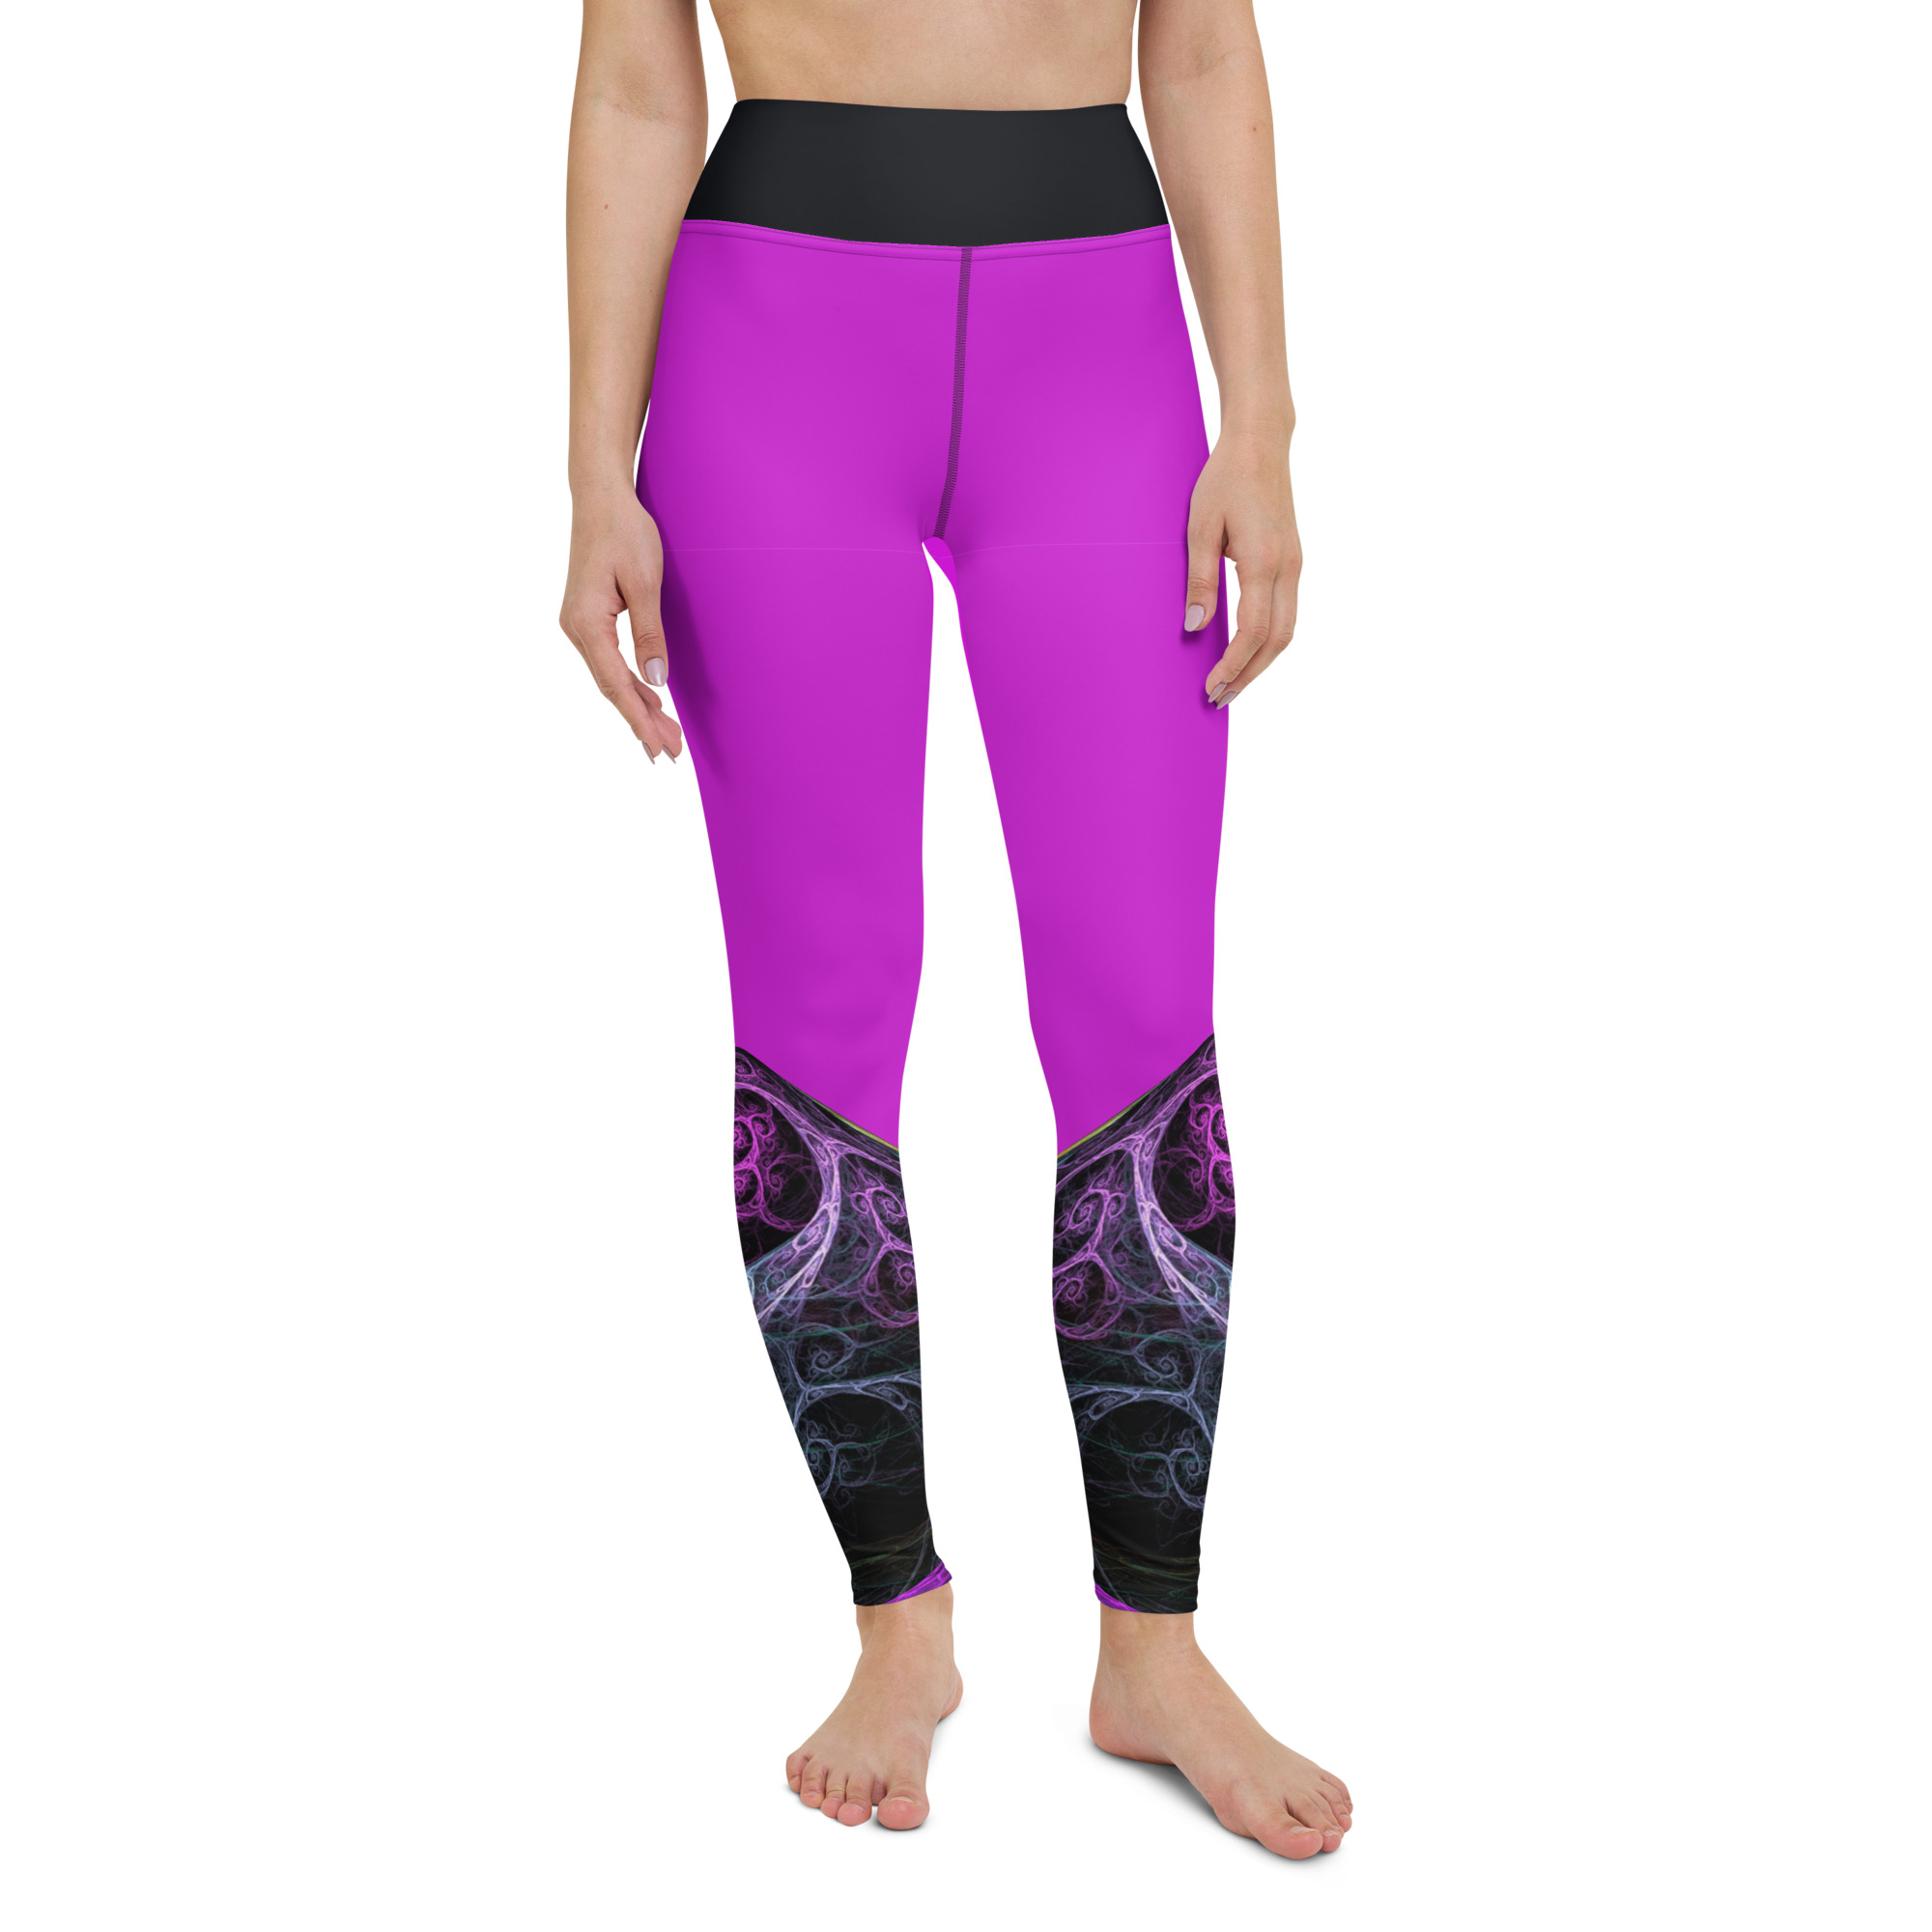 Cool Swirls and Clouds Patterned Leggings - Best Victoria Sport Leggings -  What Devotion❓ - Coolest Online Fashion Trends